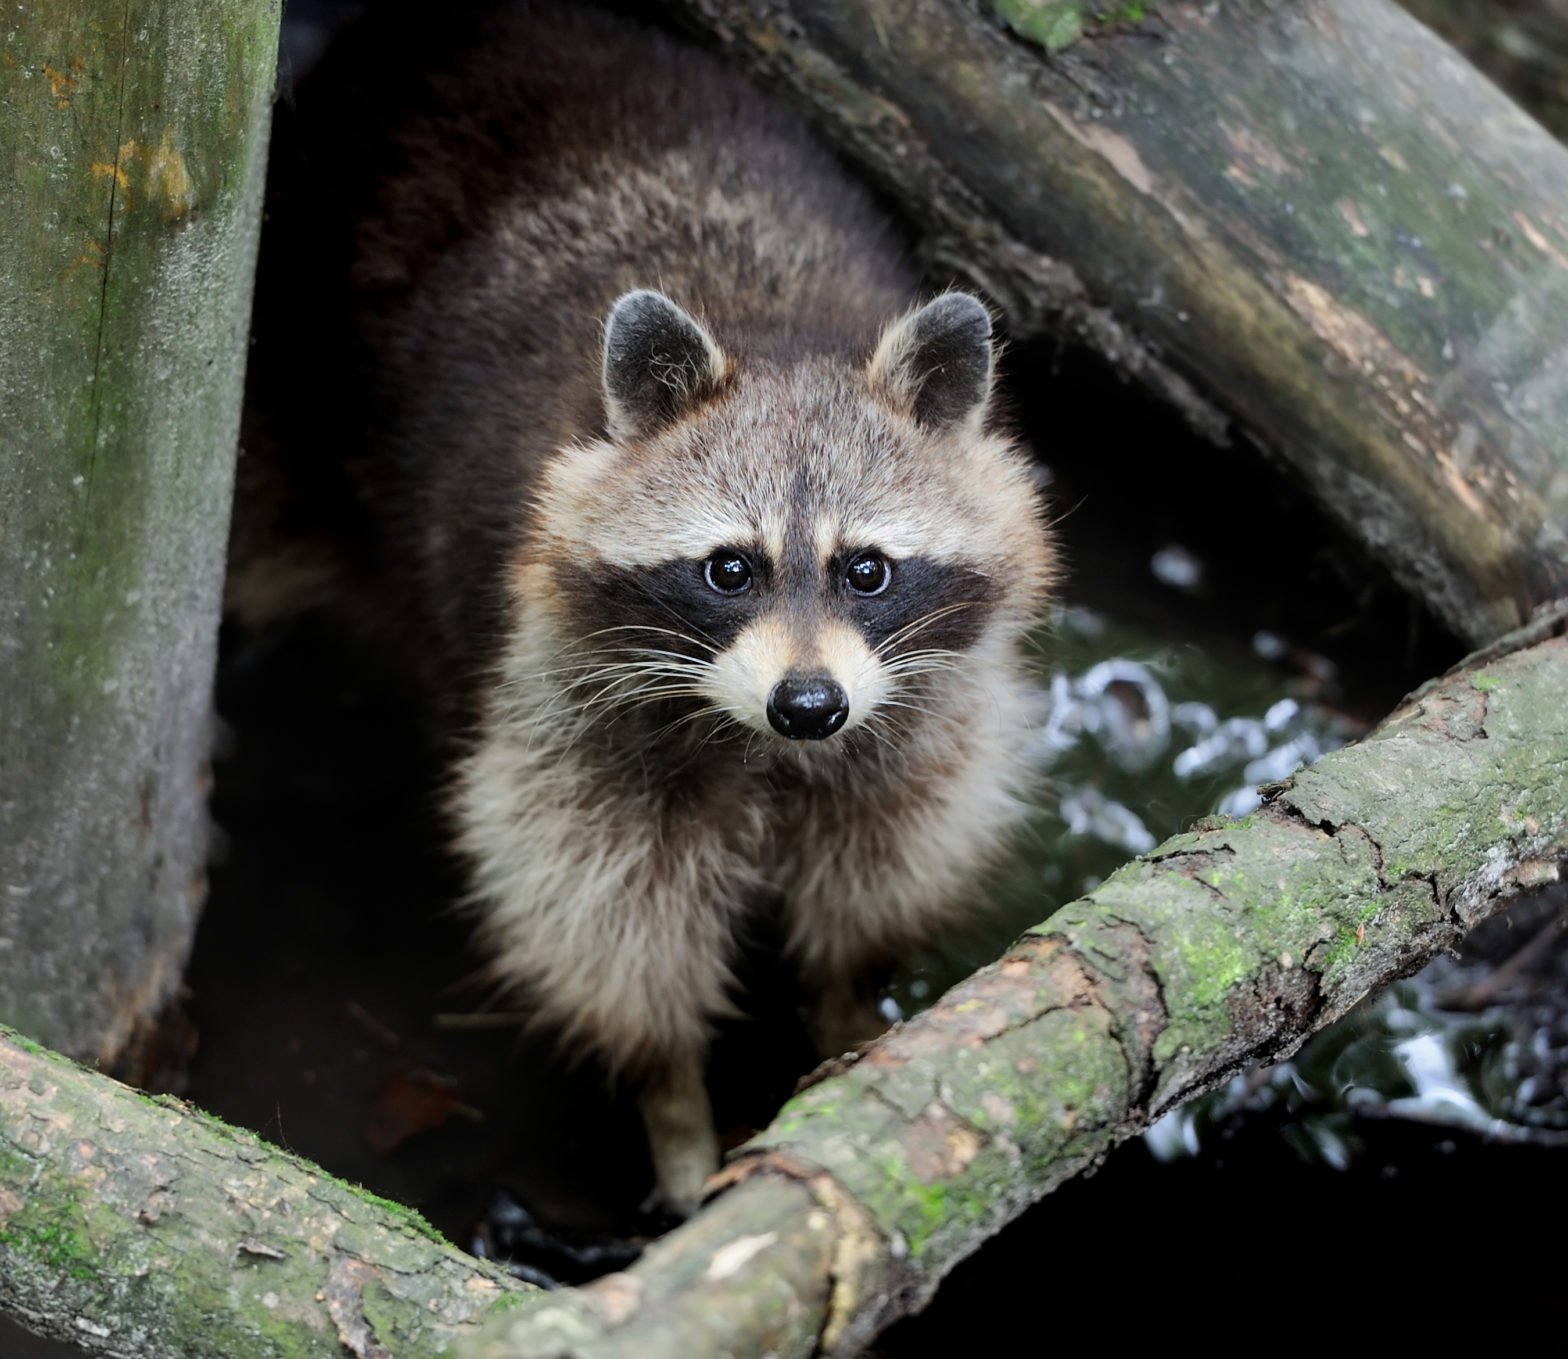 Wildlife Removal Services